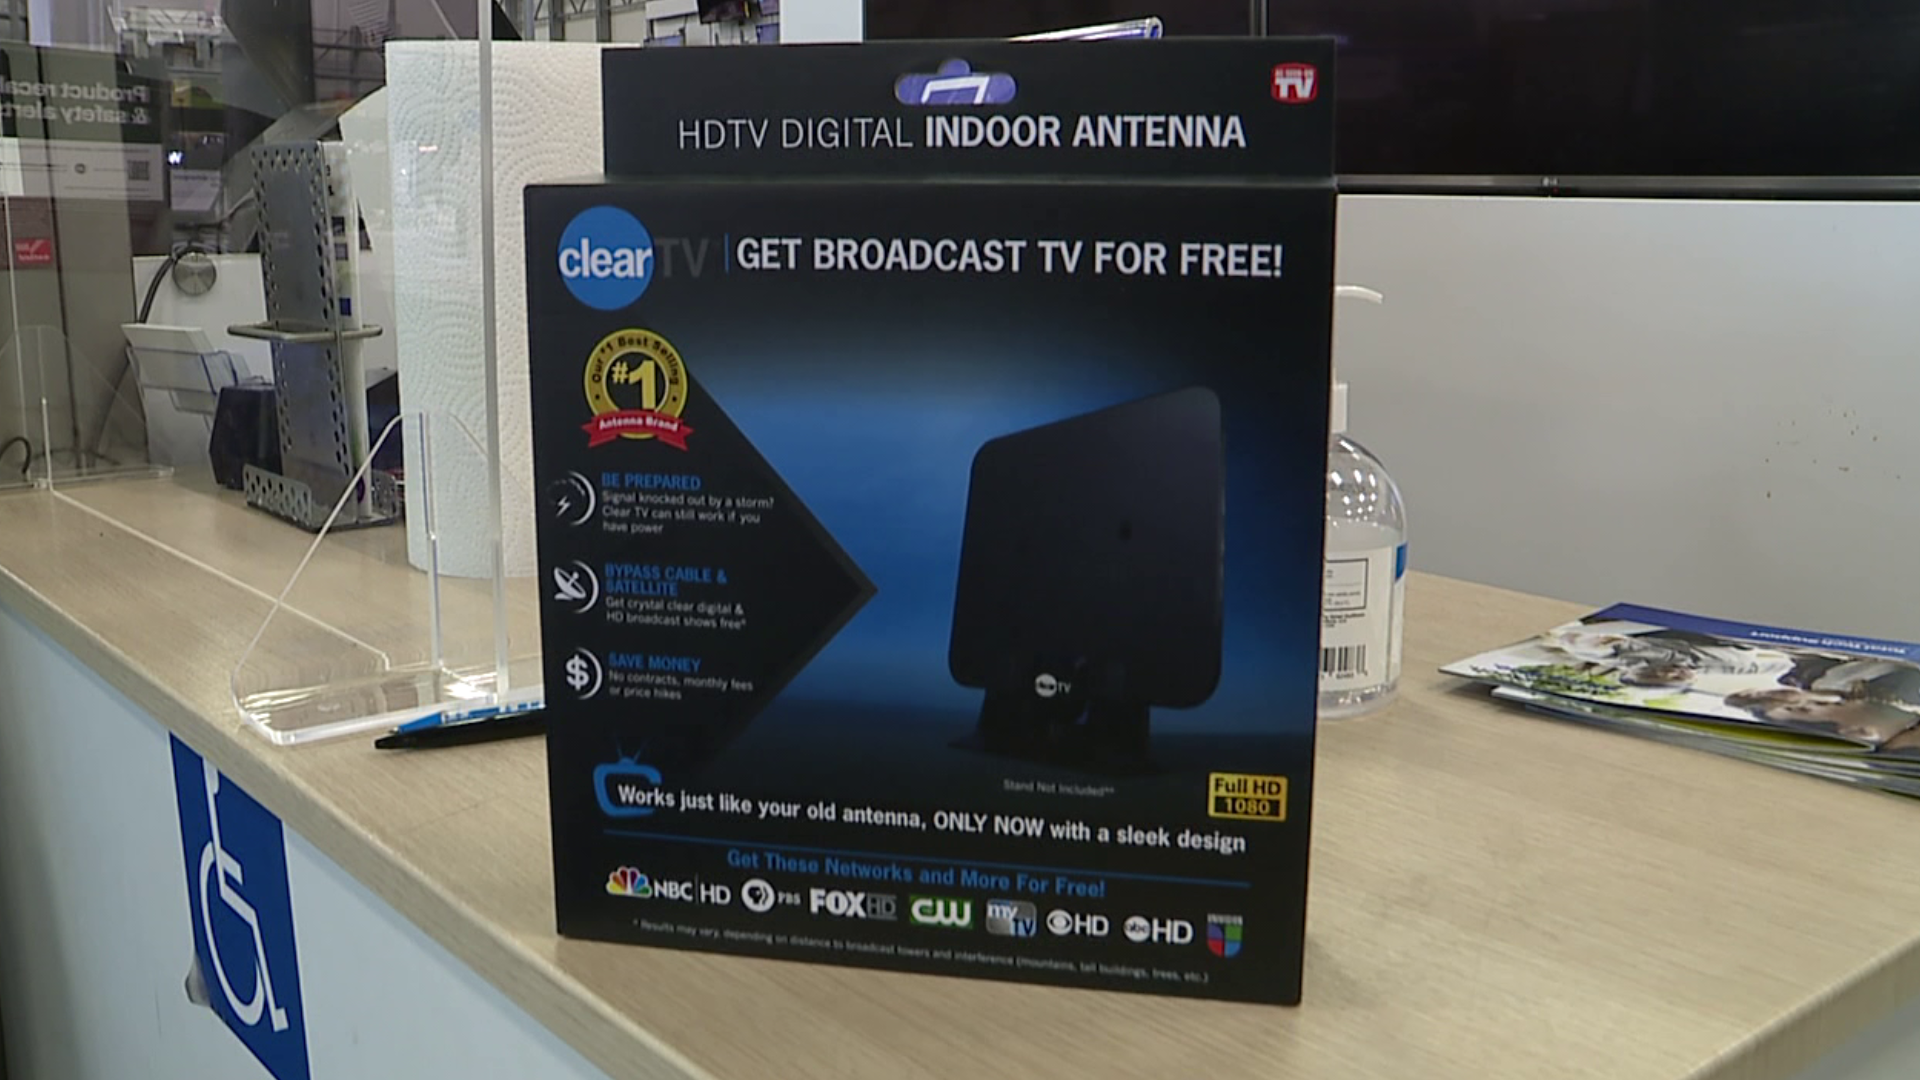 The maker claims you can watch hundreds of free HD & Digital TV Channels for free!